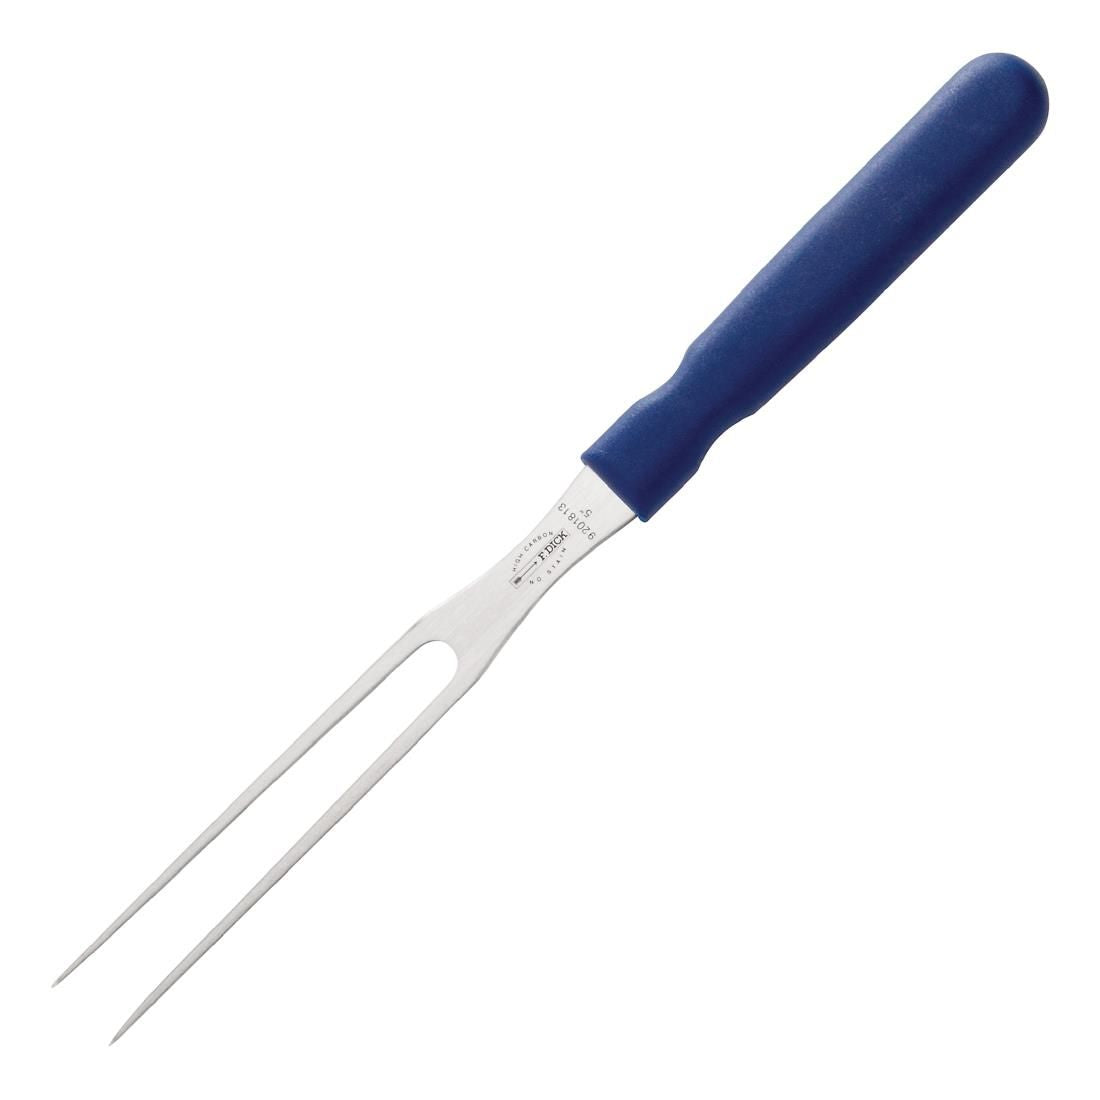 DL356 Dick Pro Dynamic HACCP Kitchen Fork Blue 12.5cm JD Catering Equipment Solutions Ltd